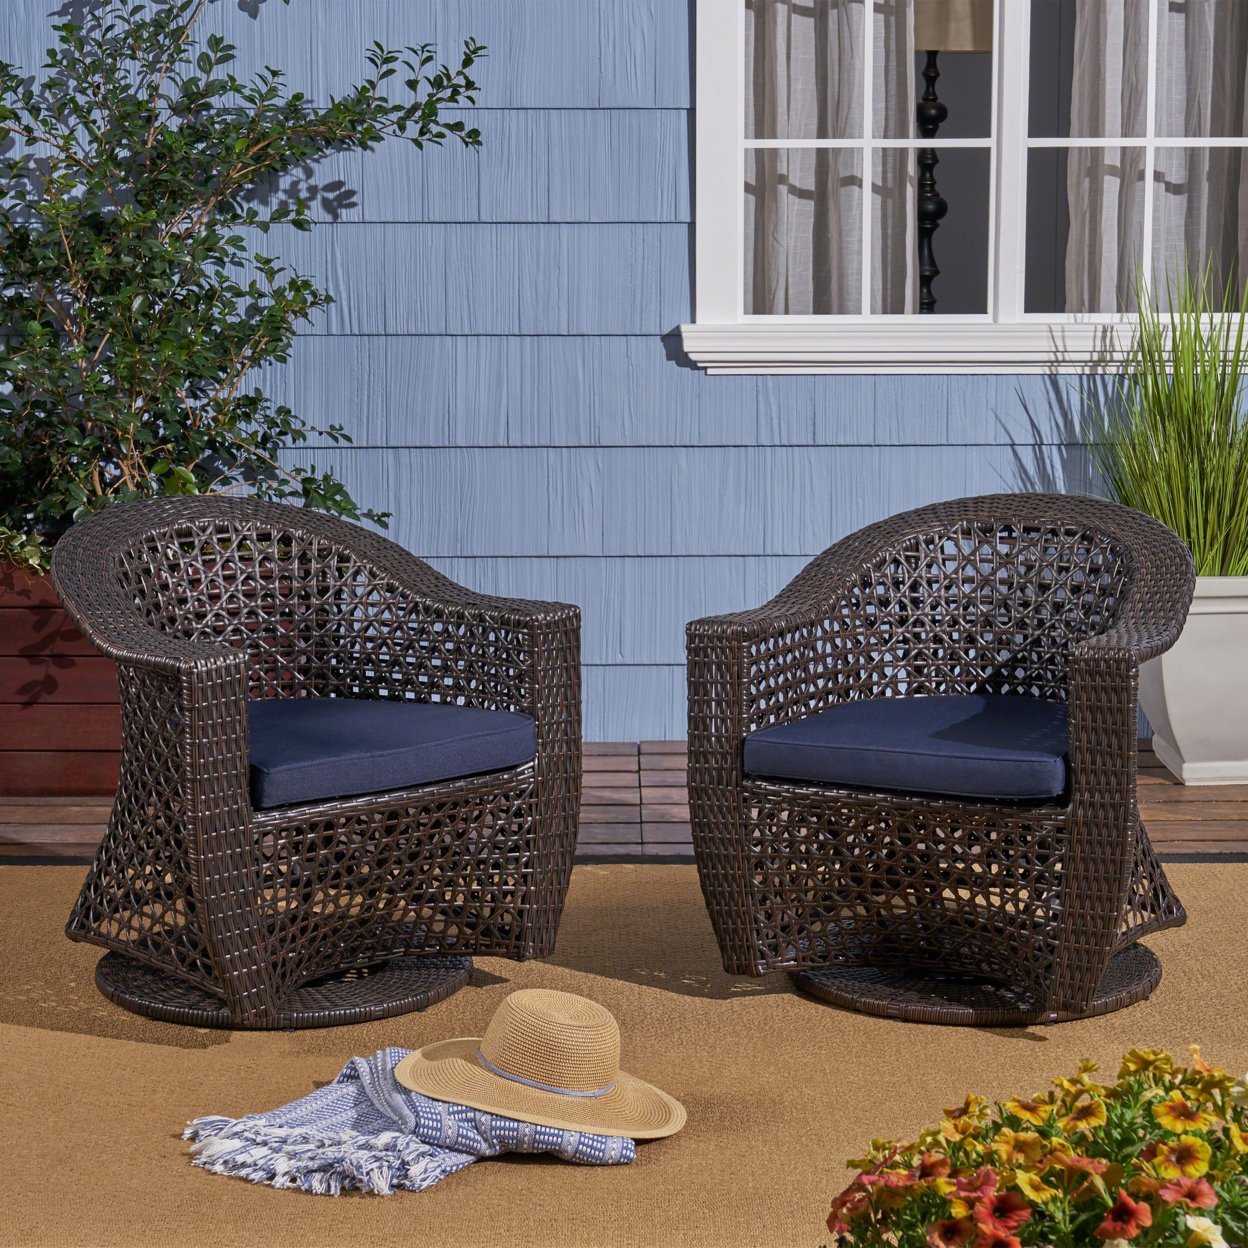 Big Sur Patio Swivel Chair, Wicker With Outdoor Cushions, Multi-Brown, Navy Blue - Single